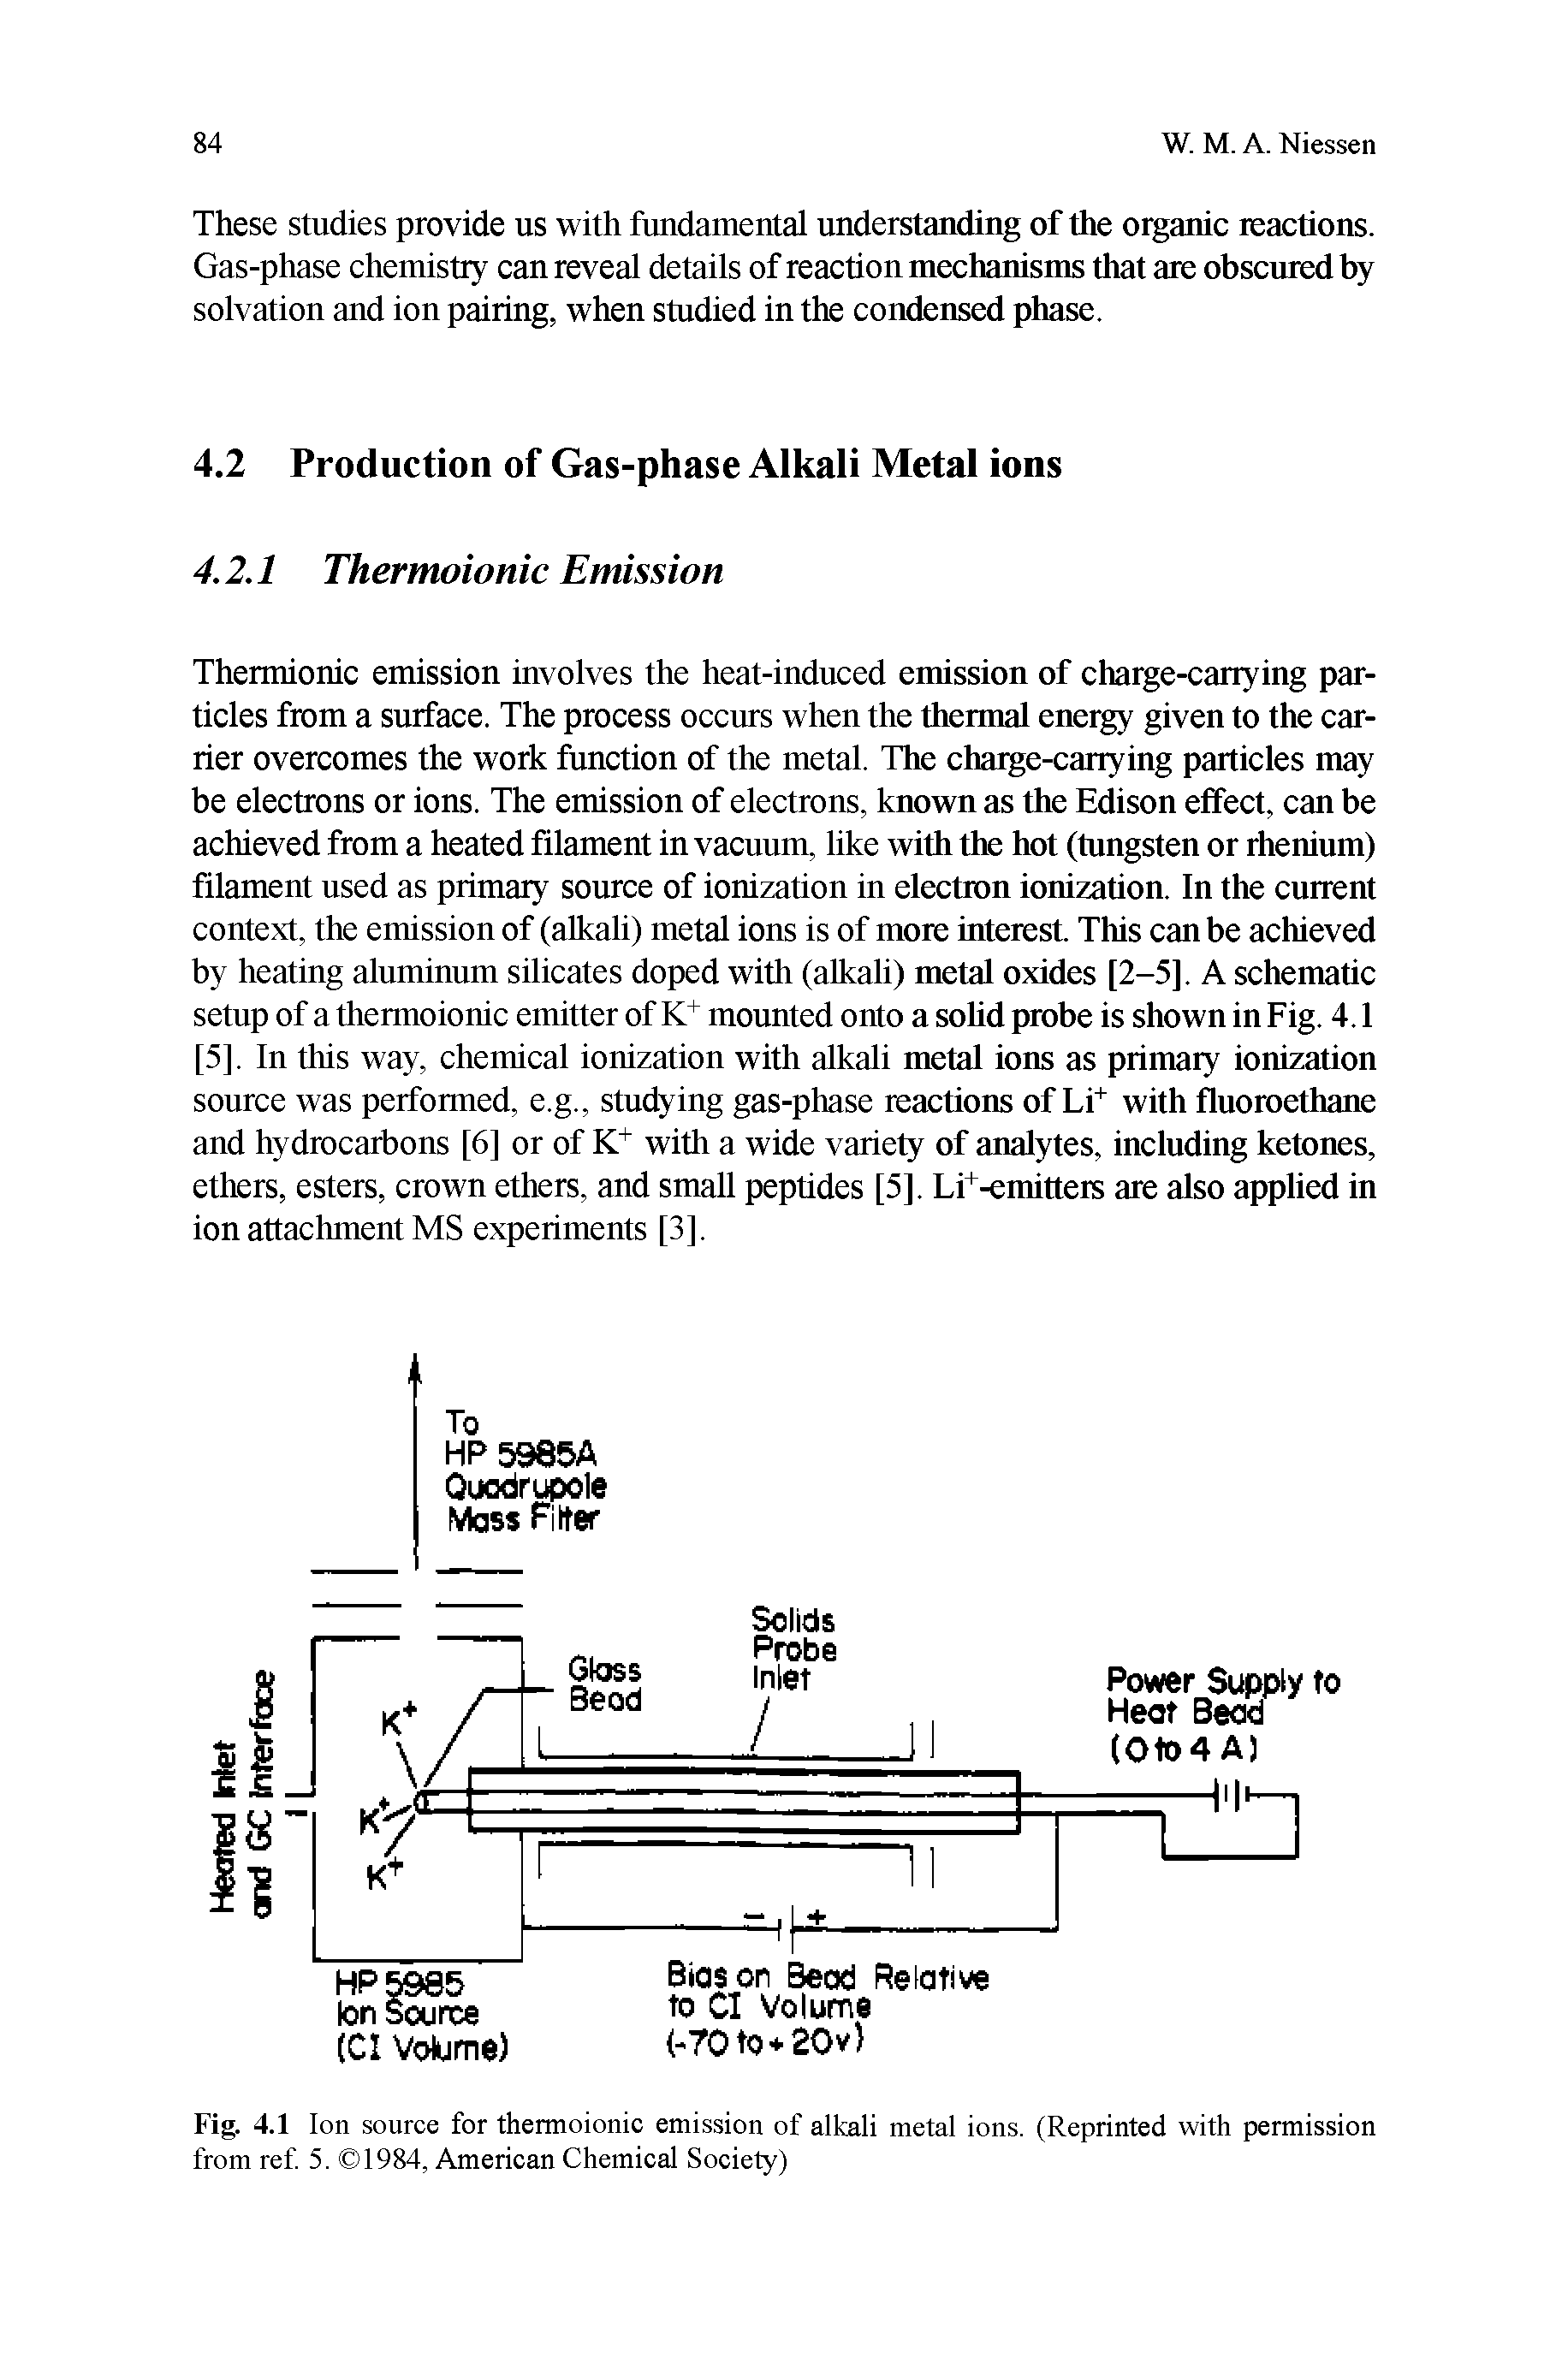 Fig. 4.1 Ion source for thermoionic emission of alkali metal ions. (Reprinted with permission from ref 5. 1984, American Chemical Society)...